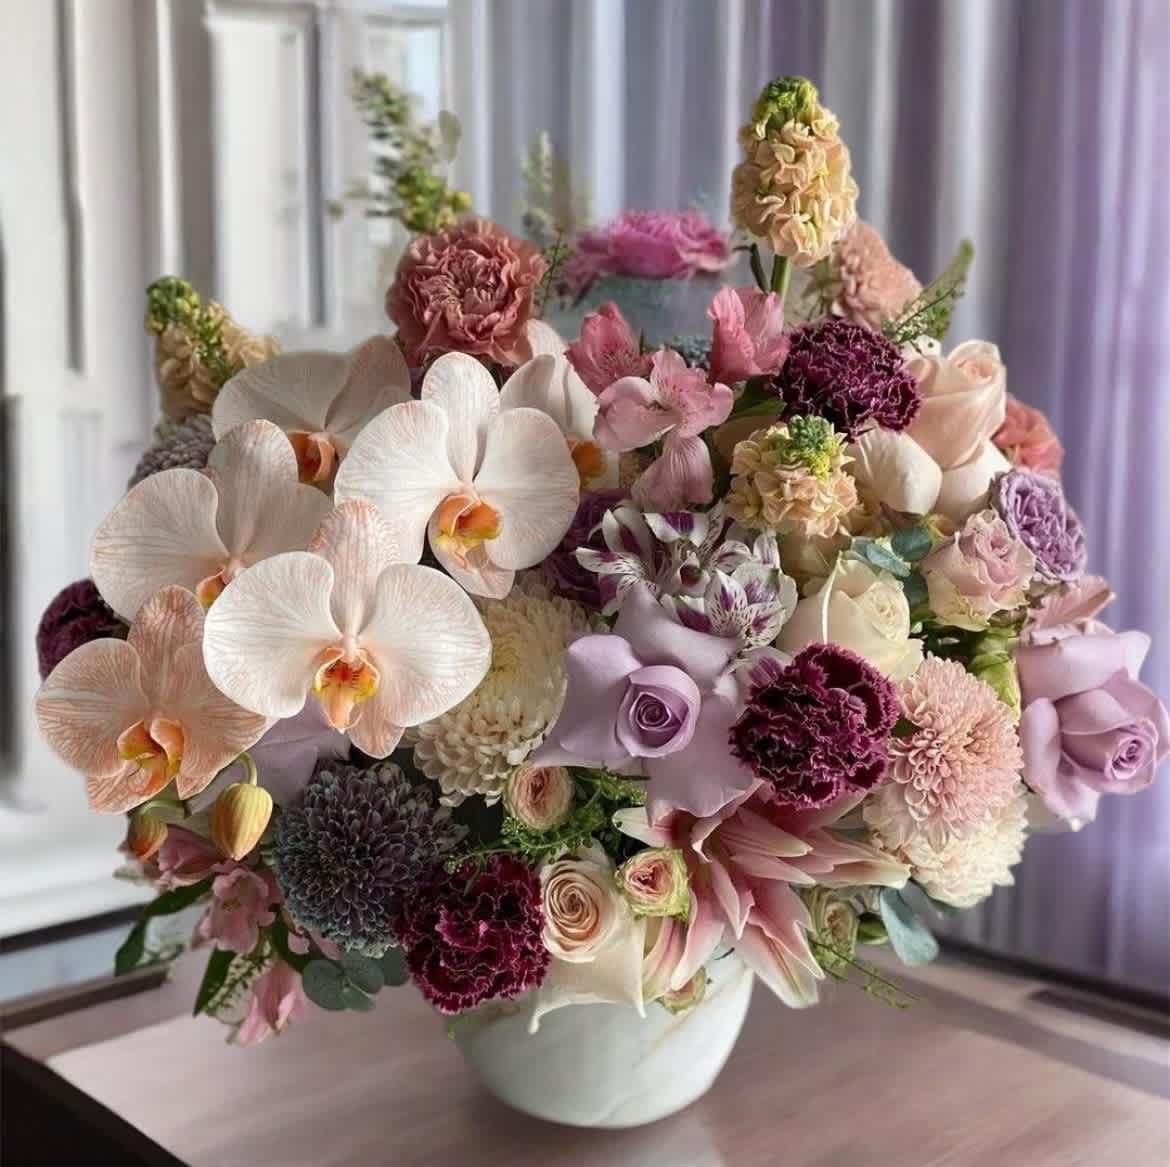 Special gift for celebration!  - Gorgeous orchids , cotton flowers, and hydrangea created lavish  bouquet in top of the sculpture. It’s an impressive work of art ! Excellent centerpiece and a special gift !